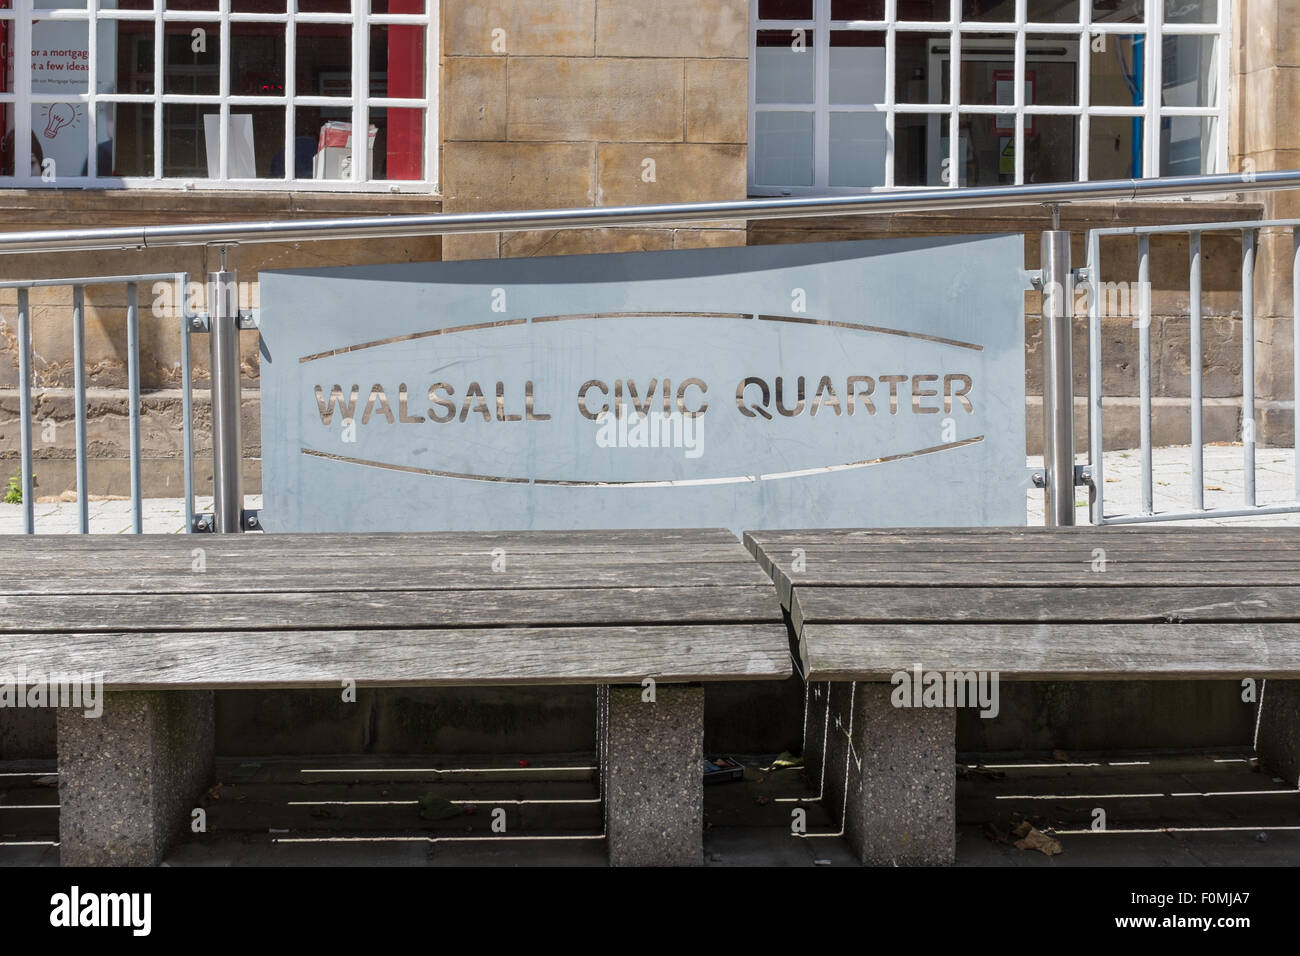 Sign for Walsall Civic Quarter on railings. Stock Photo